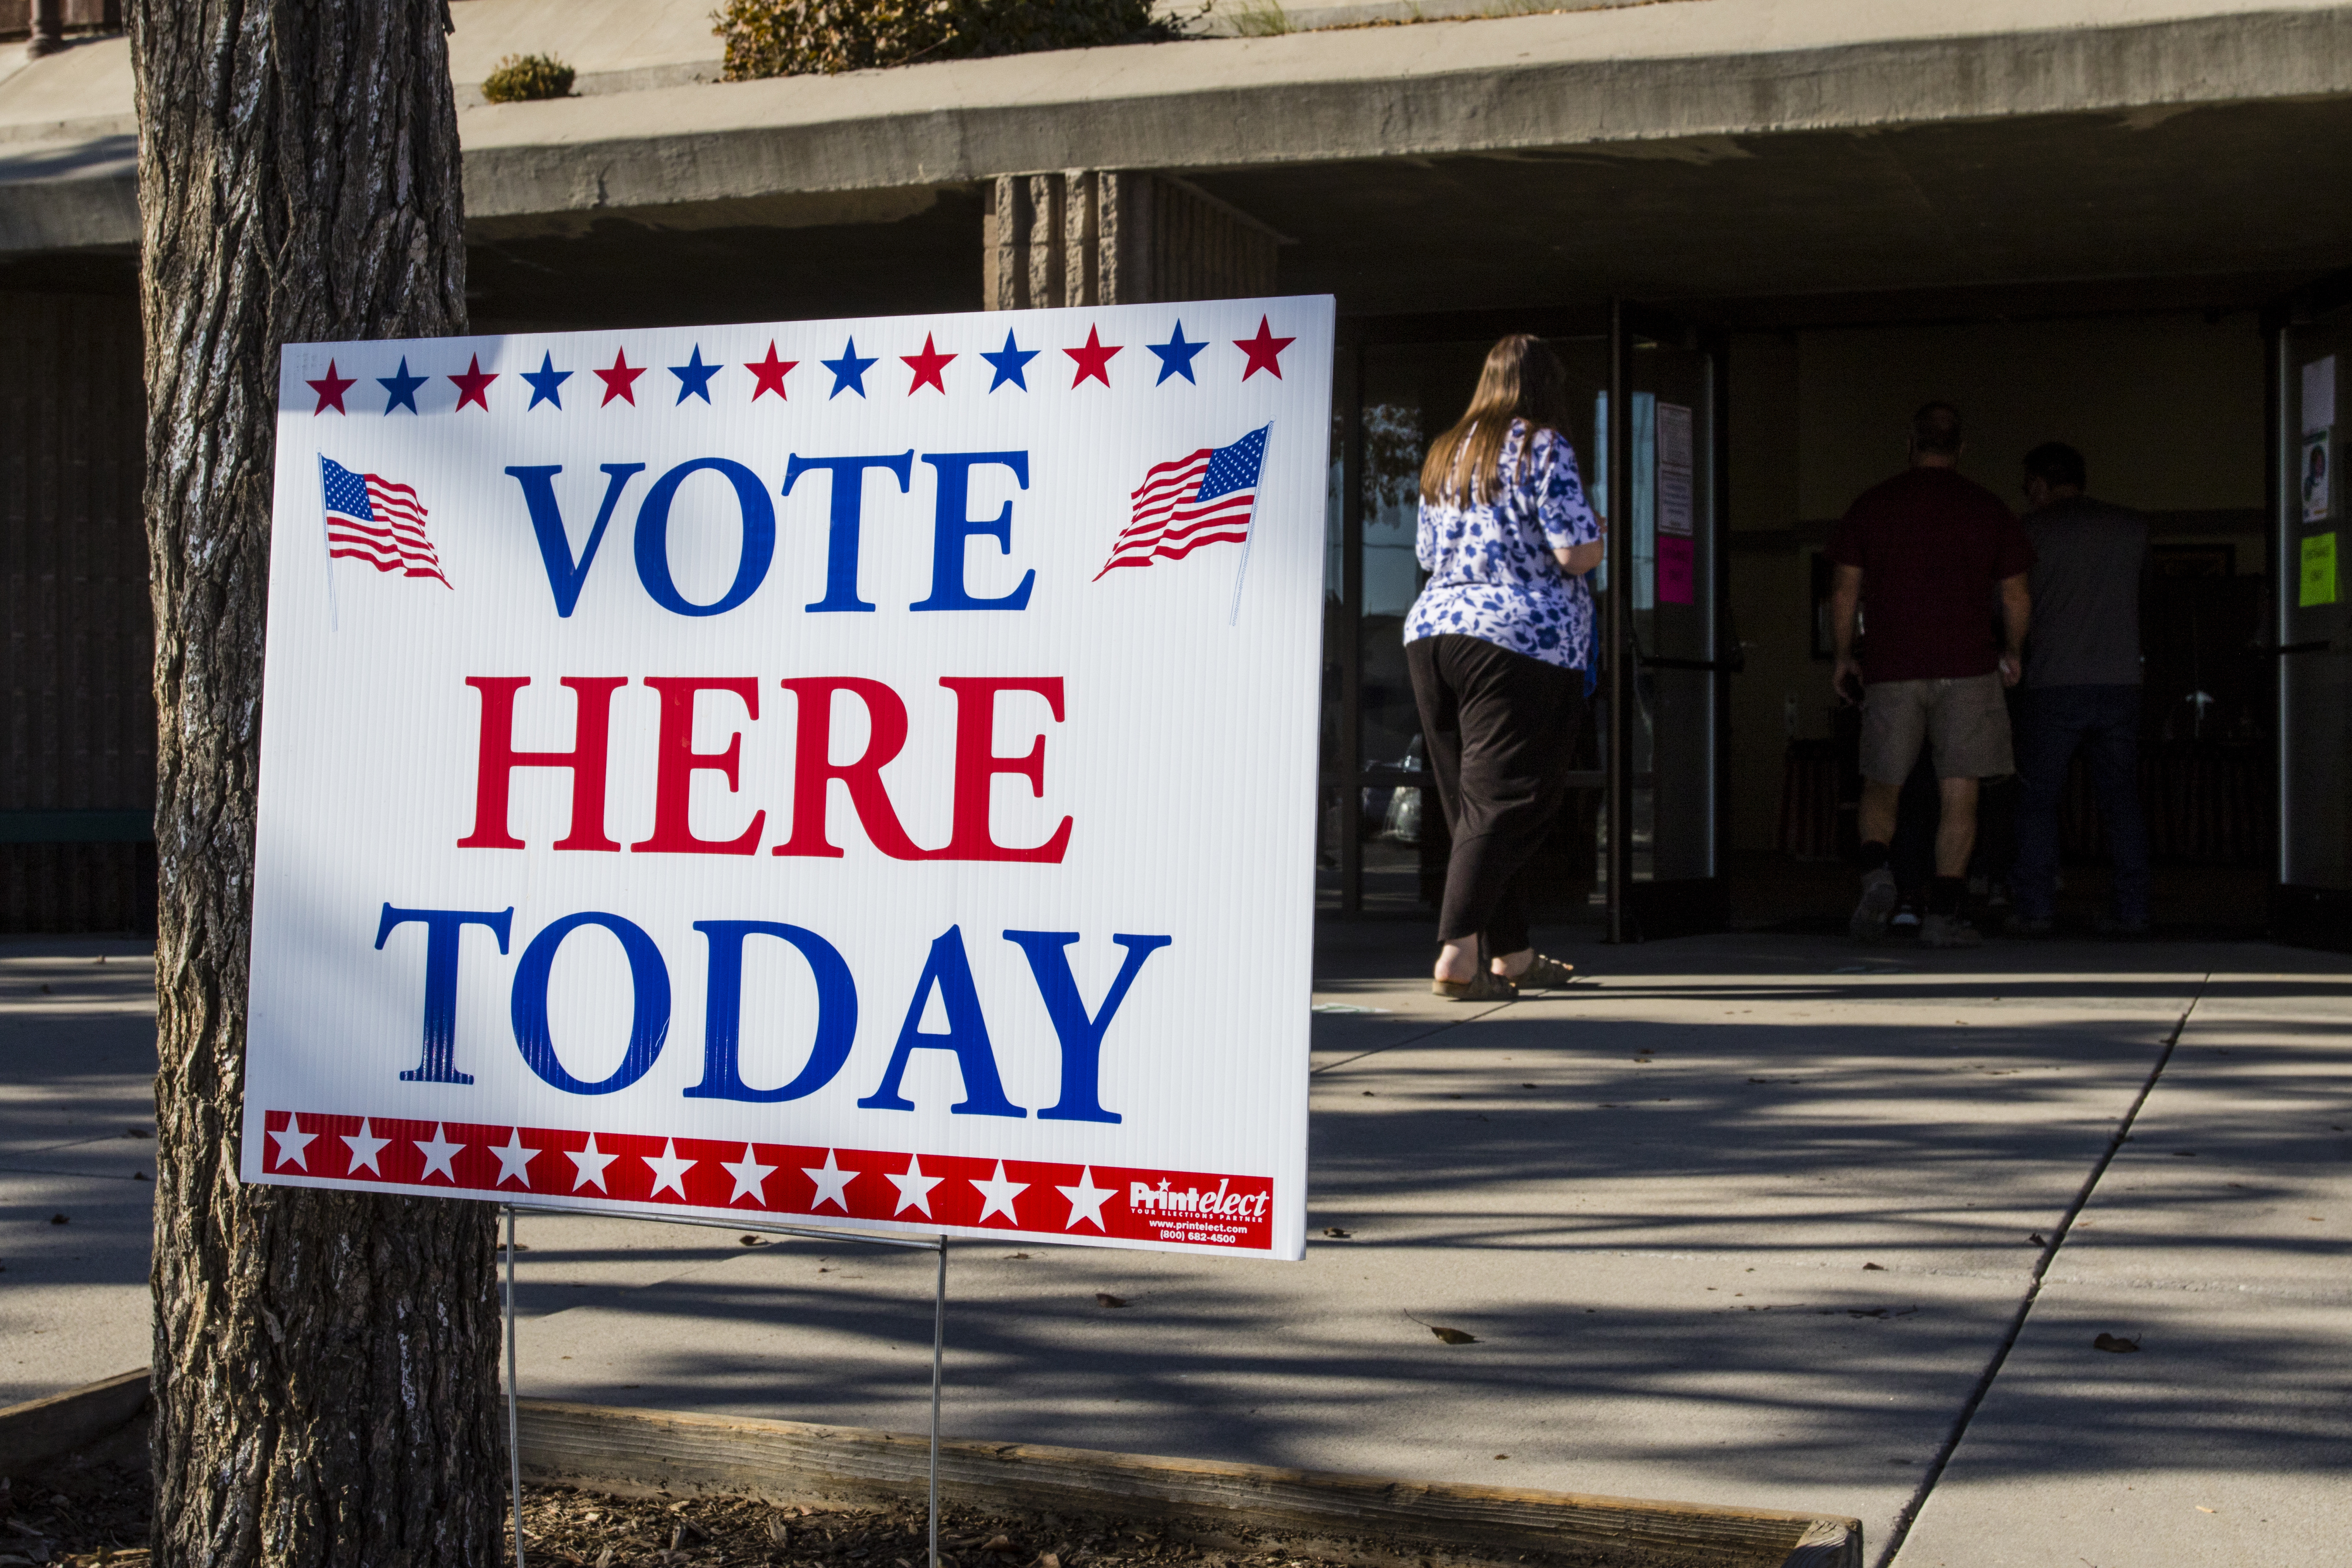 A "Vote Here Today" sign seen outside a polling station in Fallon, Nevada.